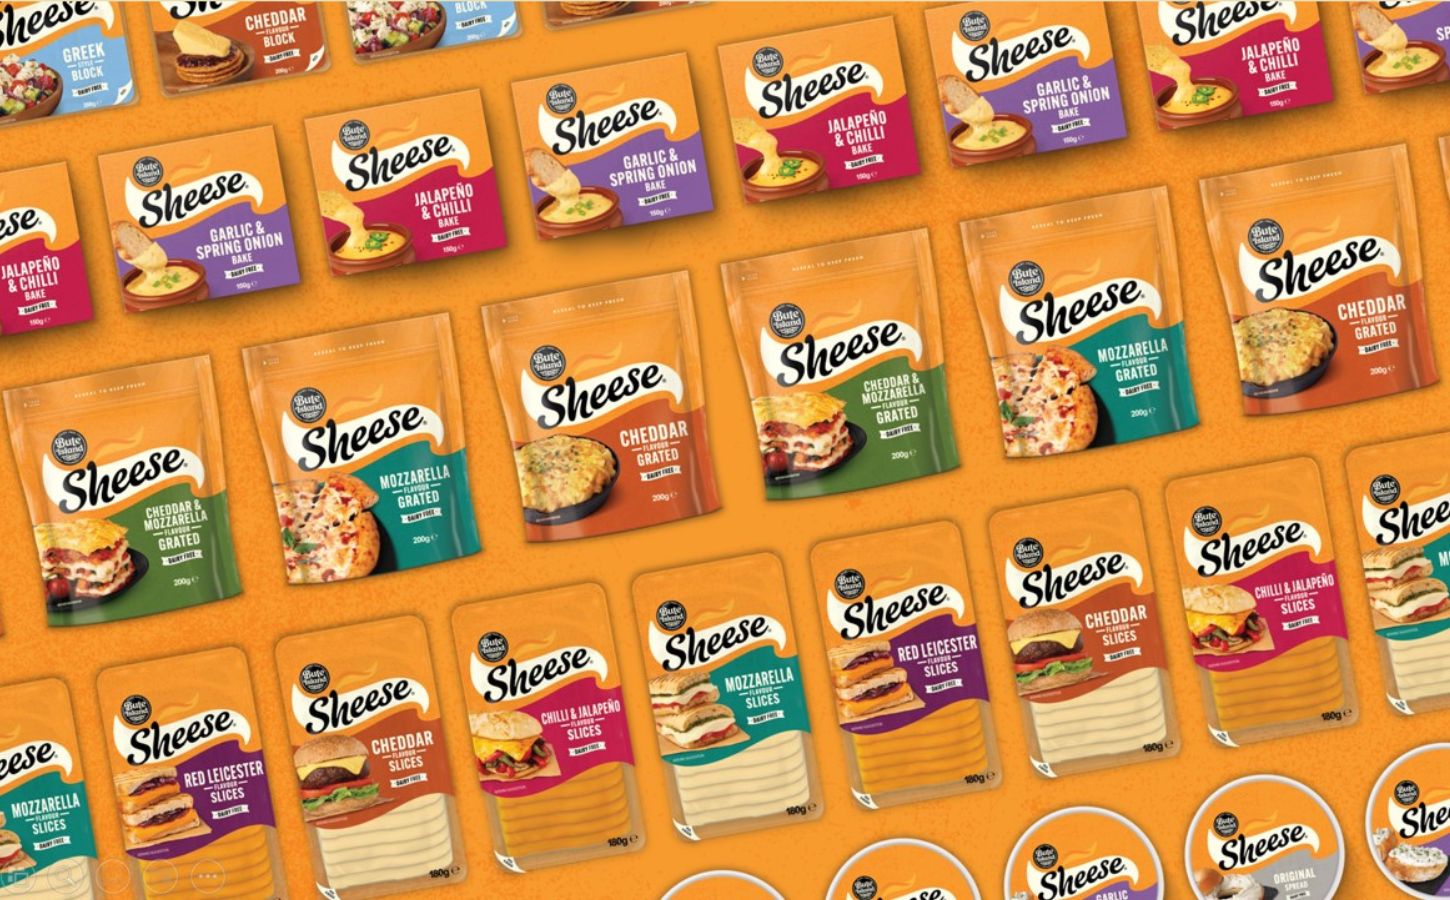 A selection of rebranded dairy-free cheese products from plant-based brand Sheese. The new products are orange in color with a new logo